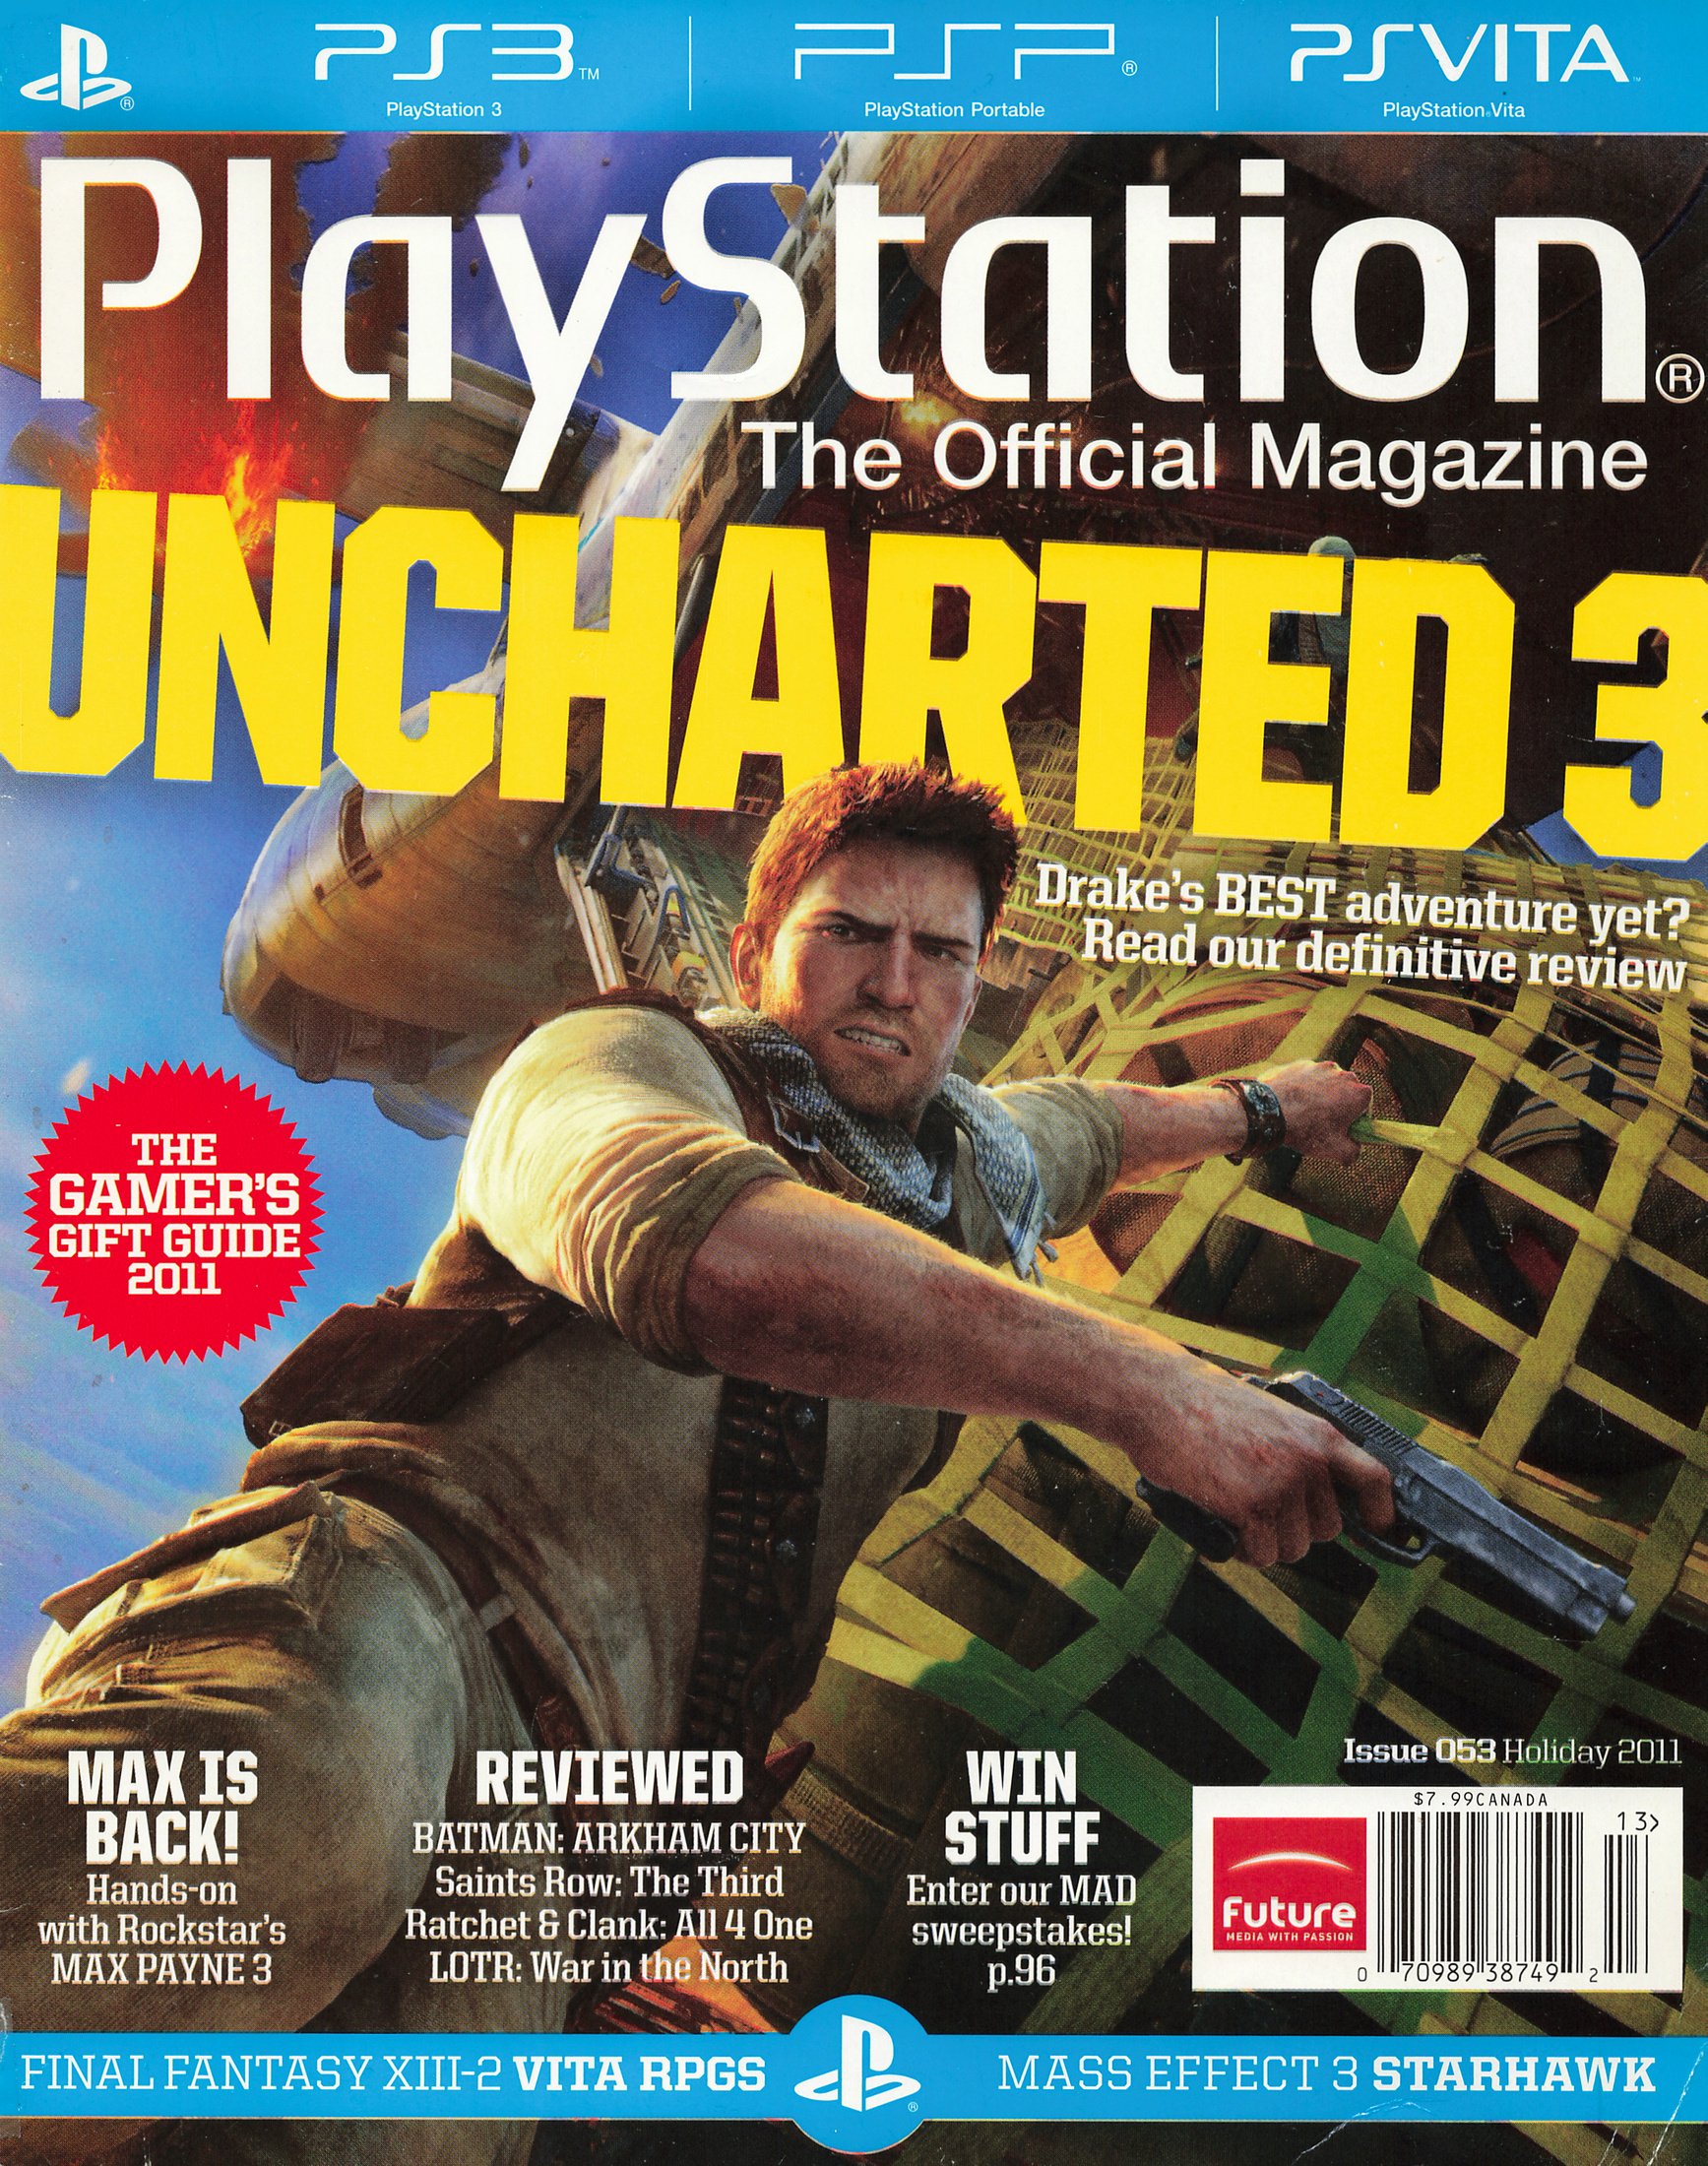 Playstation: The Official Magazine Issue 53 (Holiday 2011)